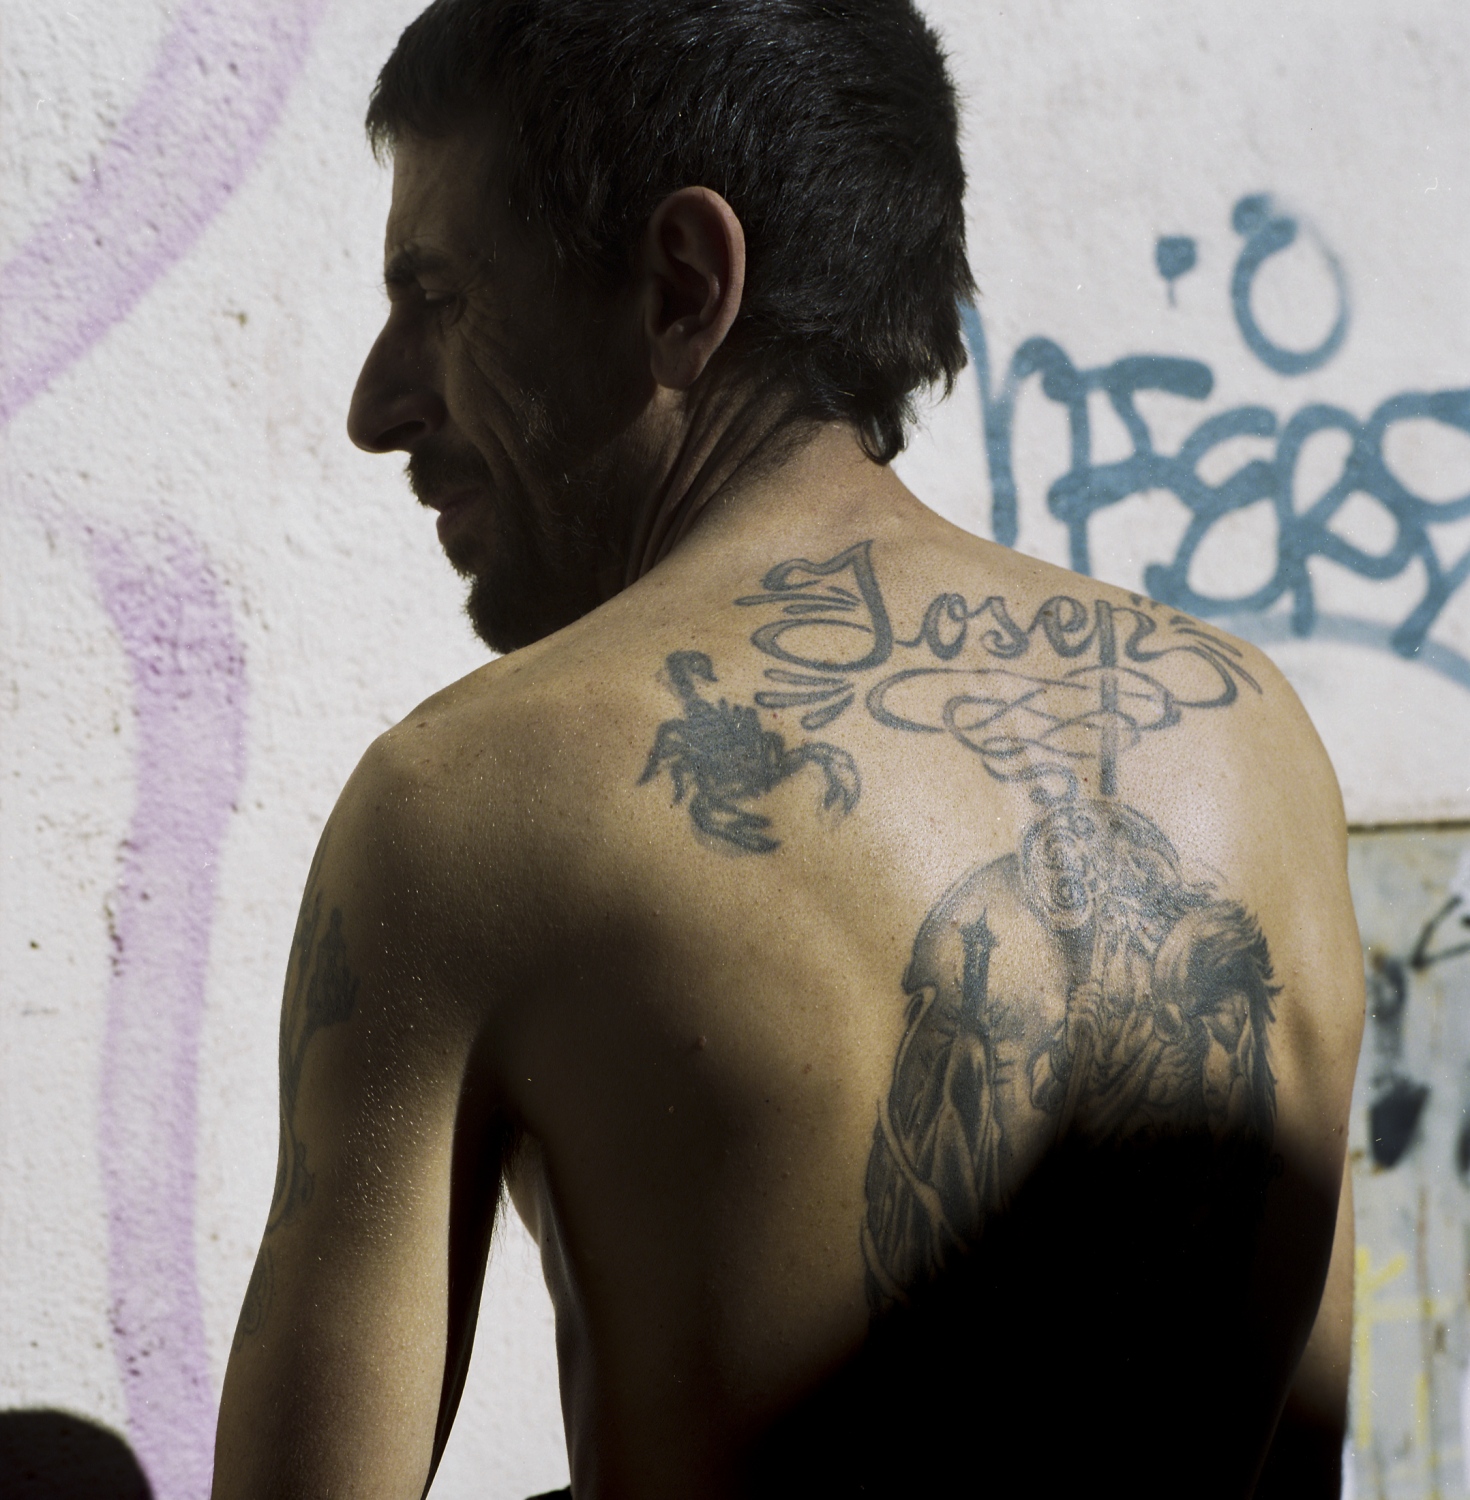 Jose displays his son&rsquo;s name tattooed above a locksmith figure. Jose takes pride in...